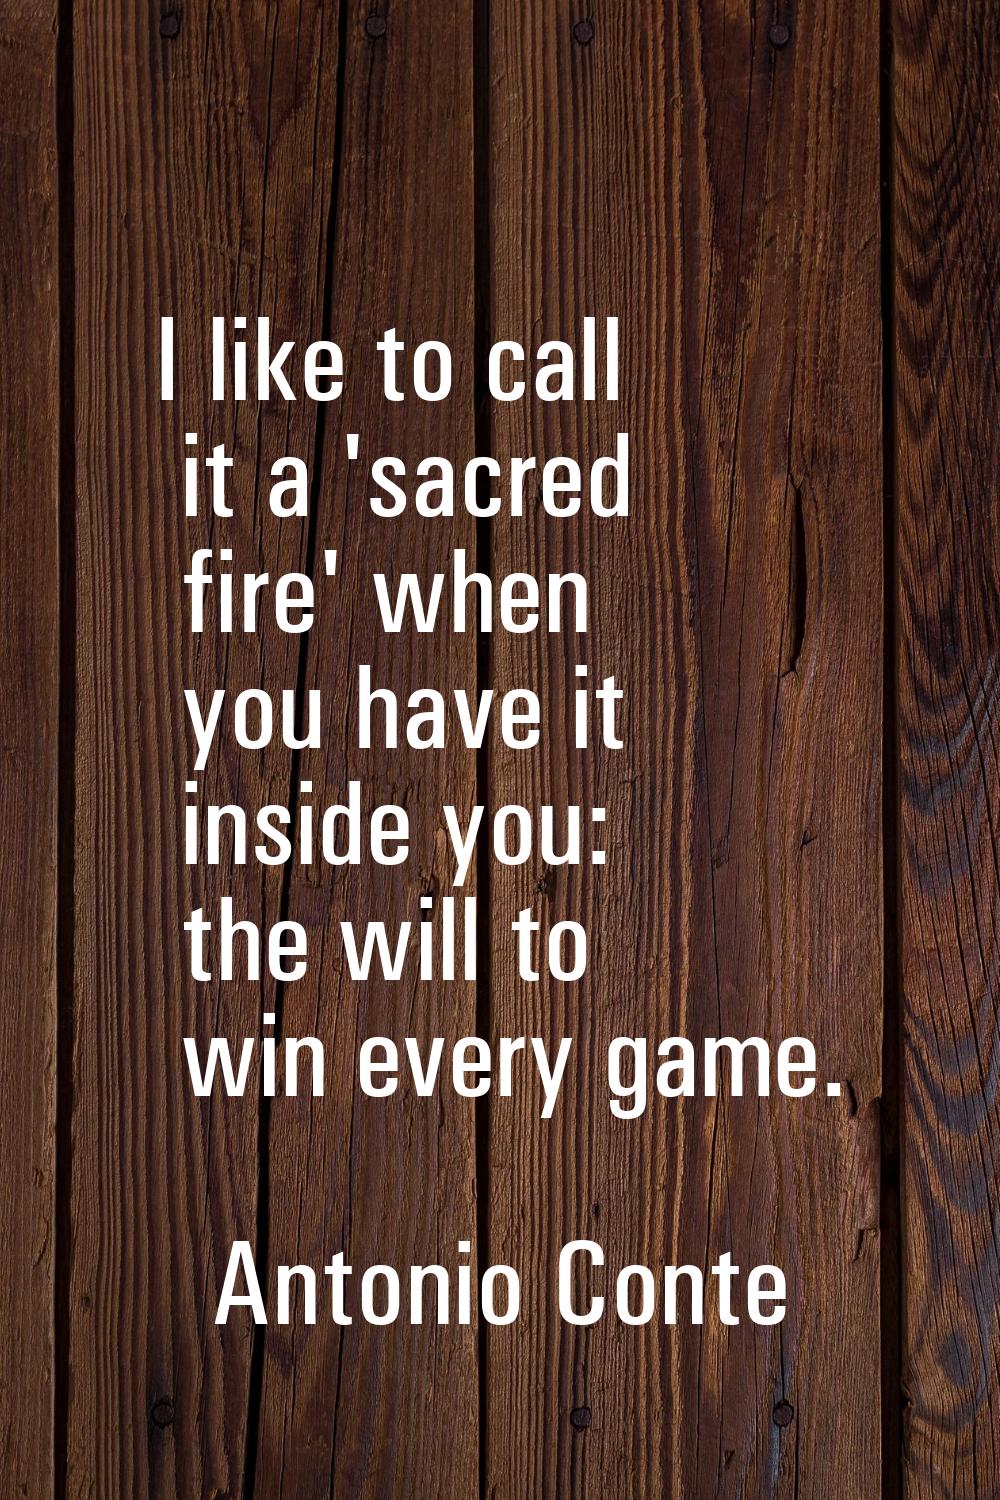 I like to call it a 'sacred fire' when you have it inside you: the will to win every game.